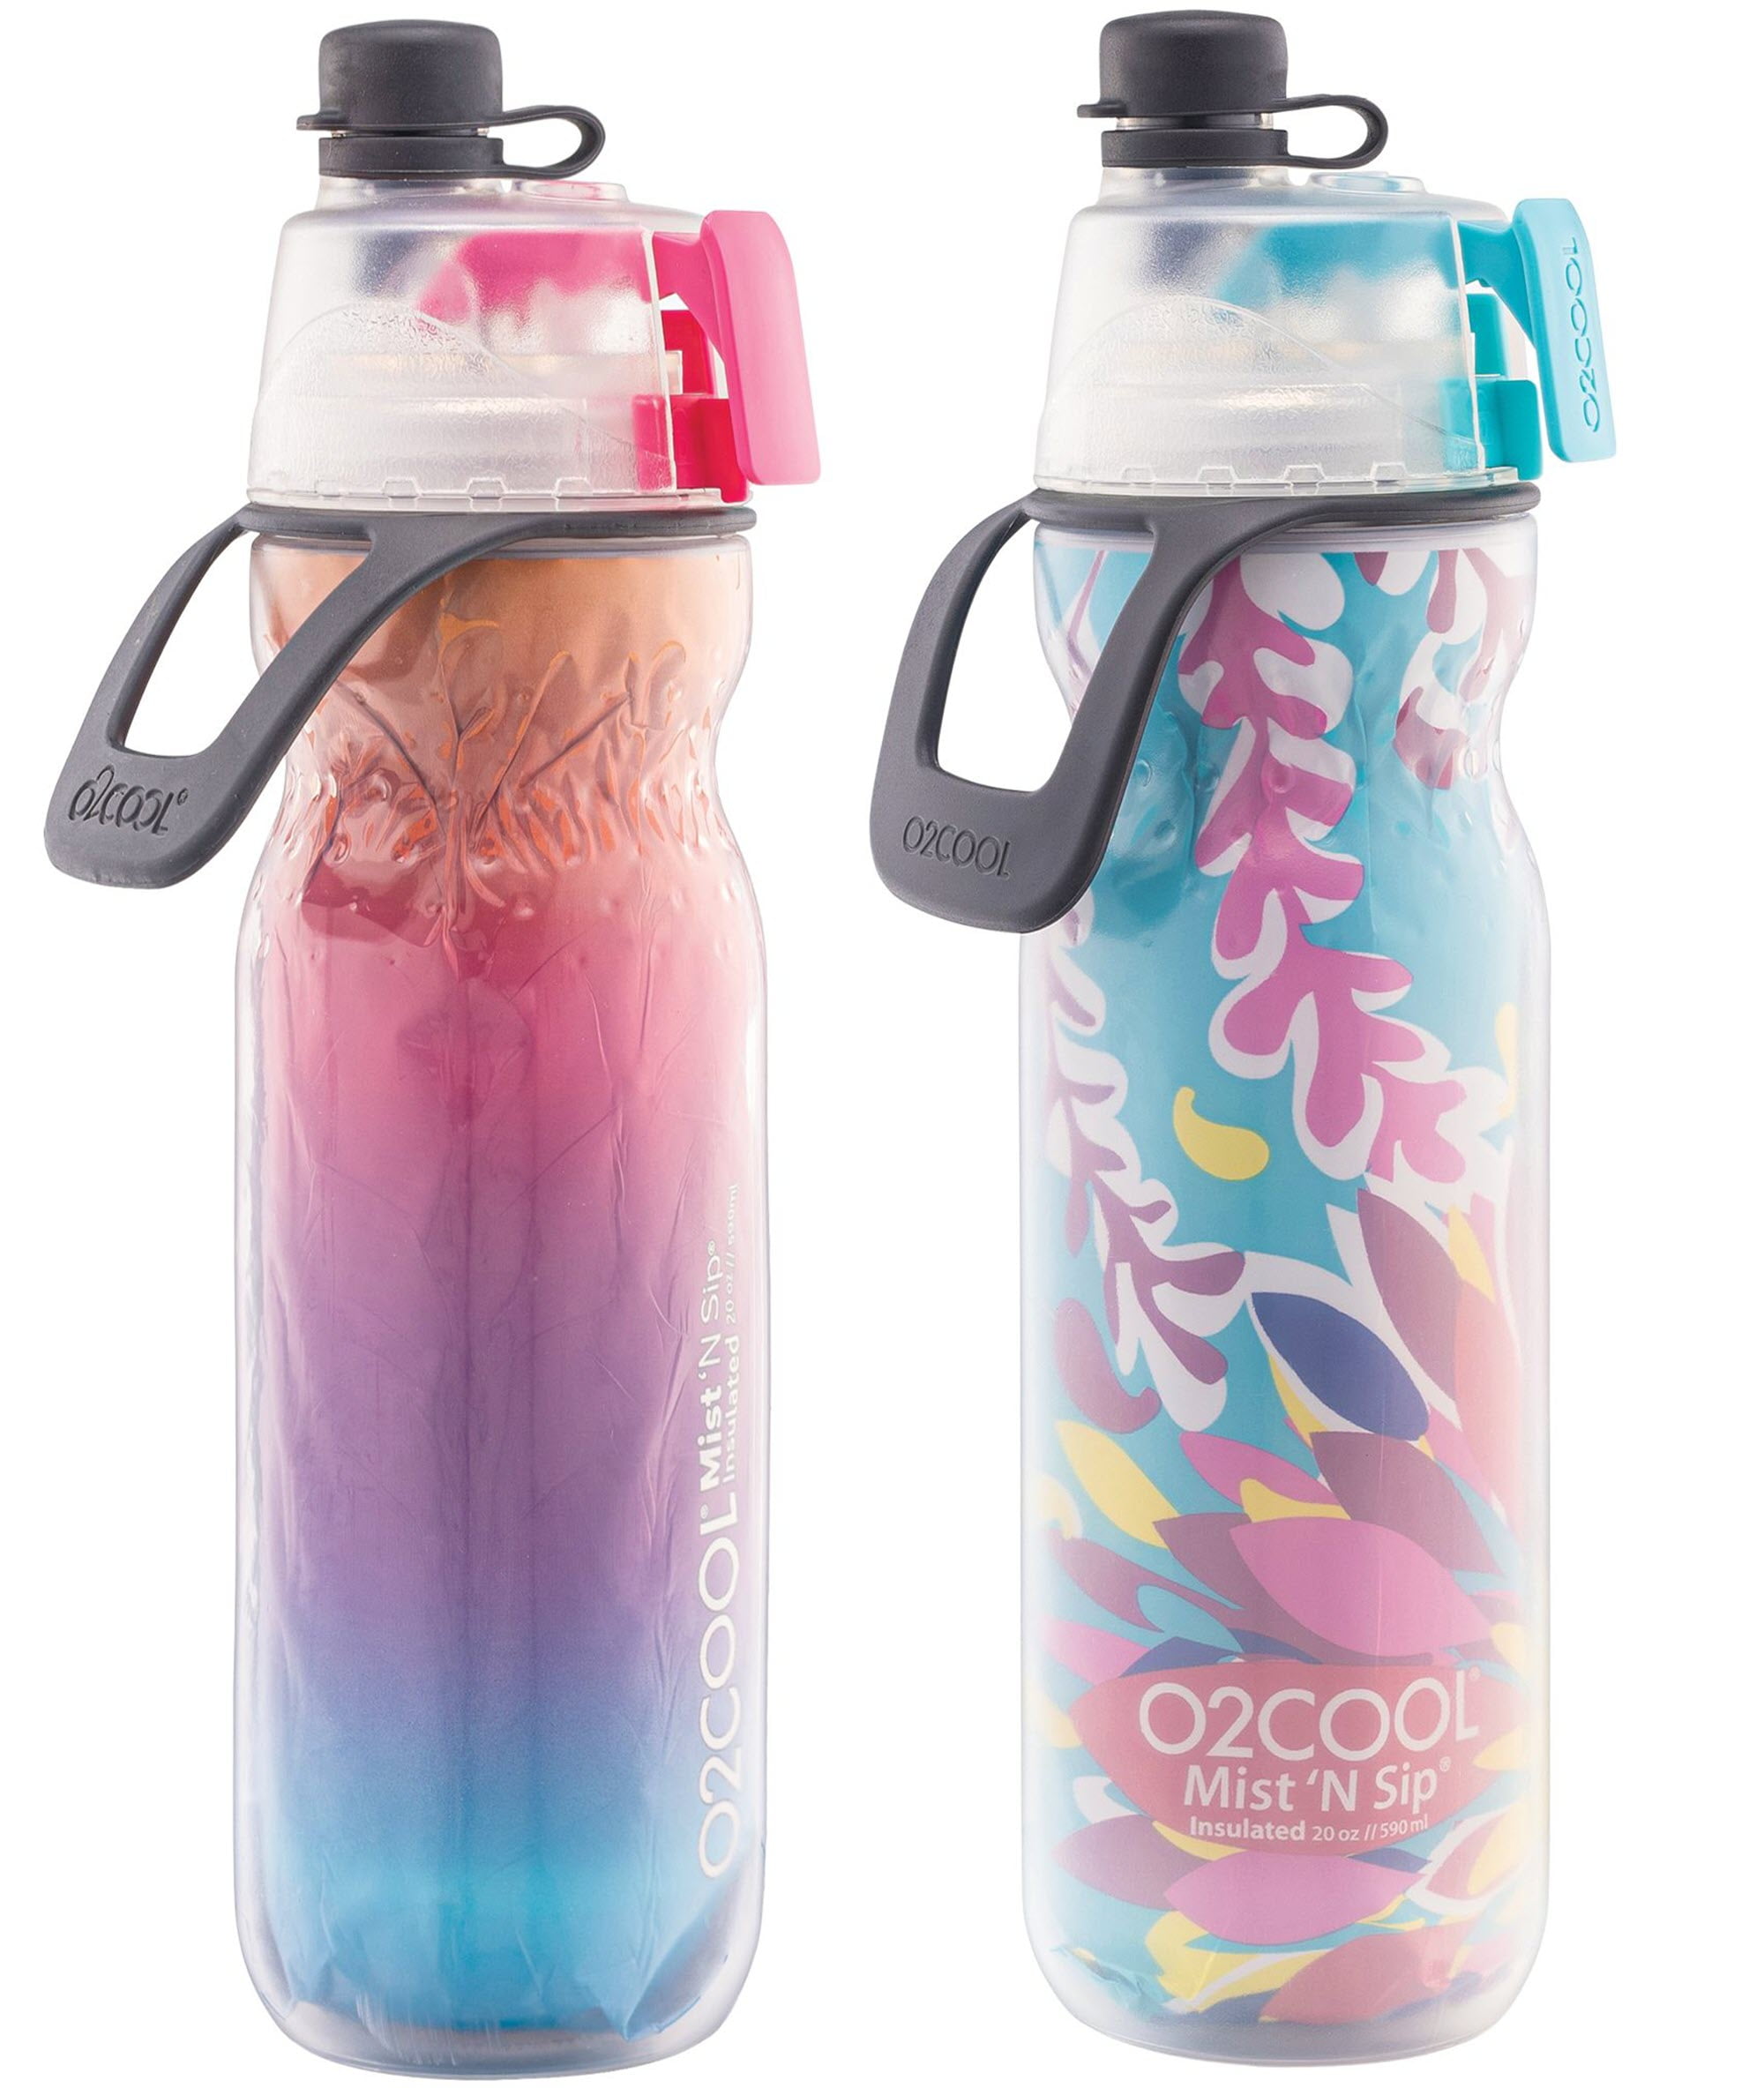 Soccer O2COOL HMCDP31 Arcticsqueeze Insulated Mist N Sip 20 oz Bottle 